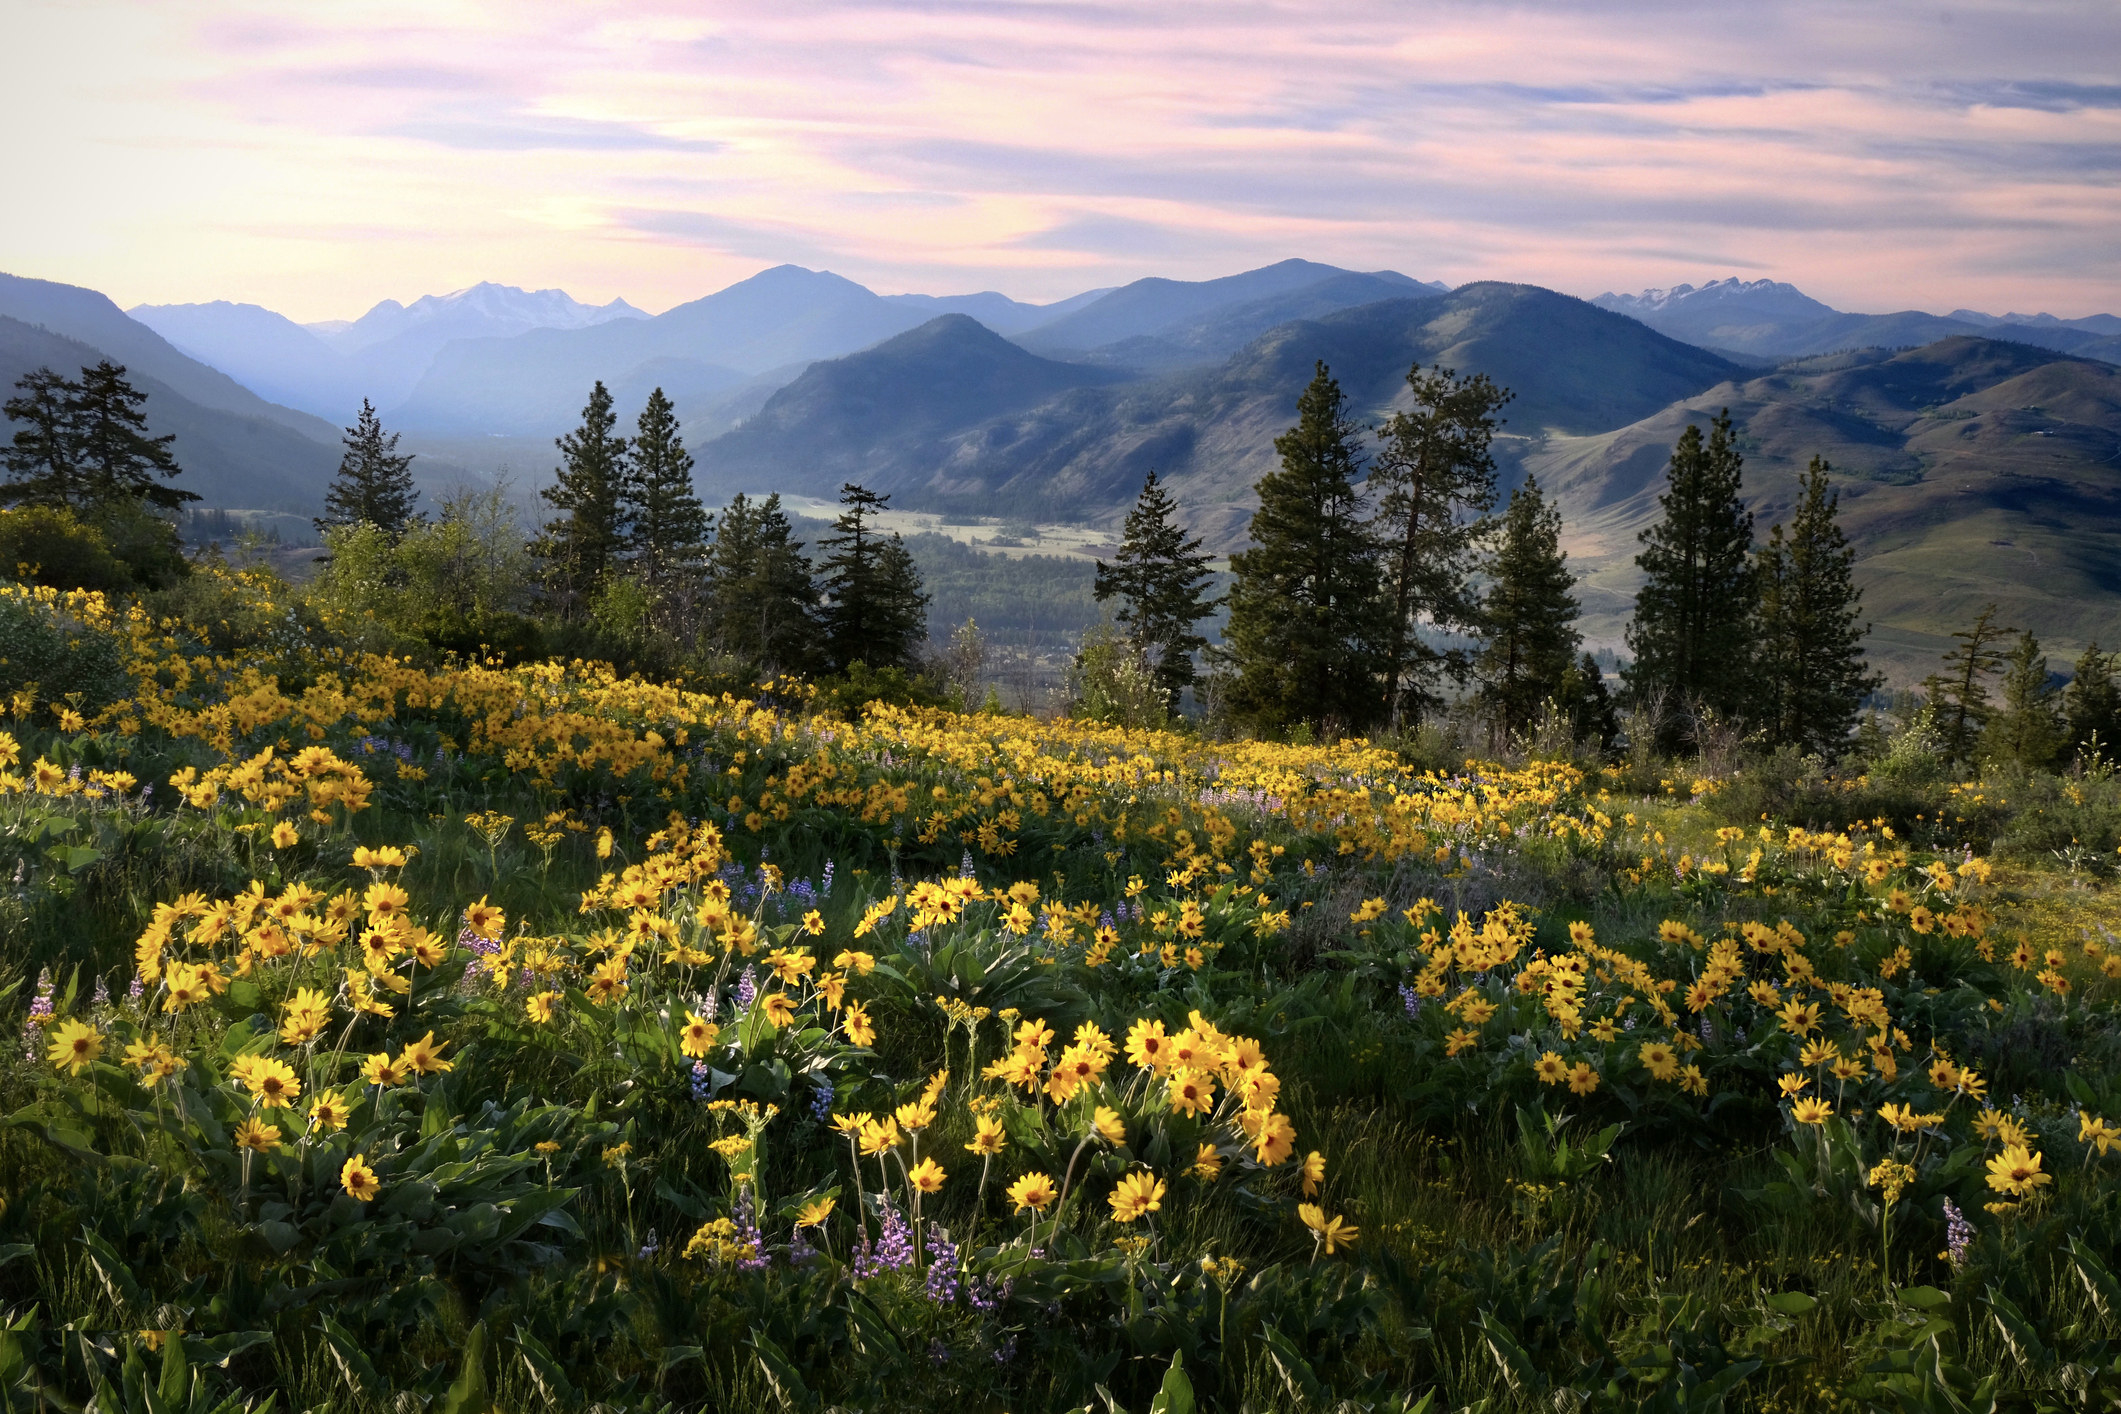 Flowers in meadows by snowcapped mountains in North Cascades National Park.